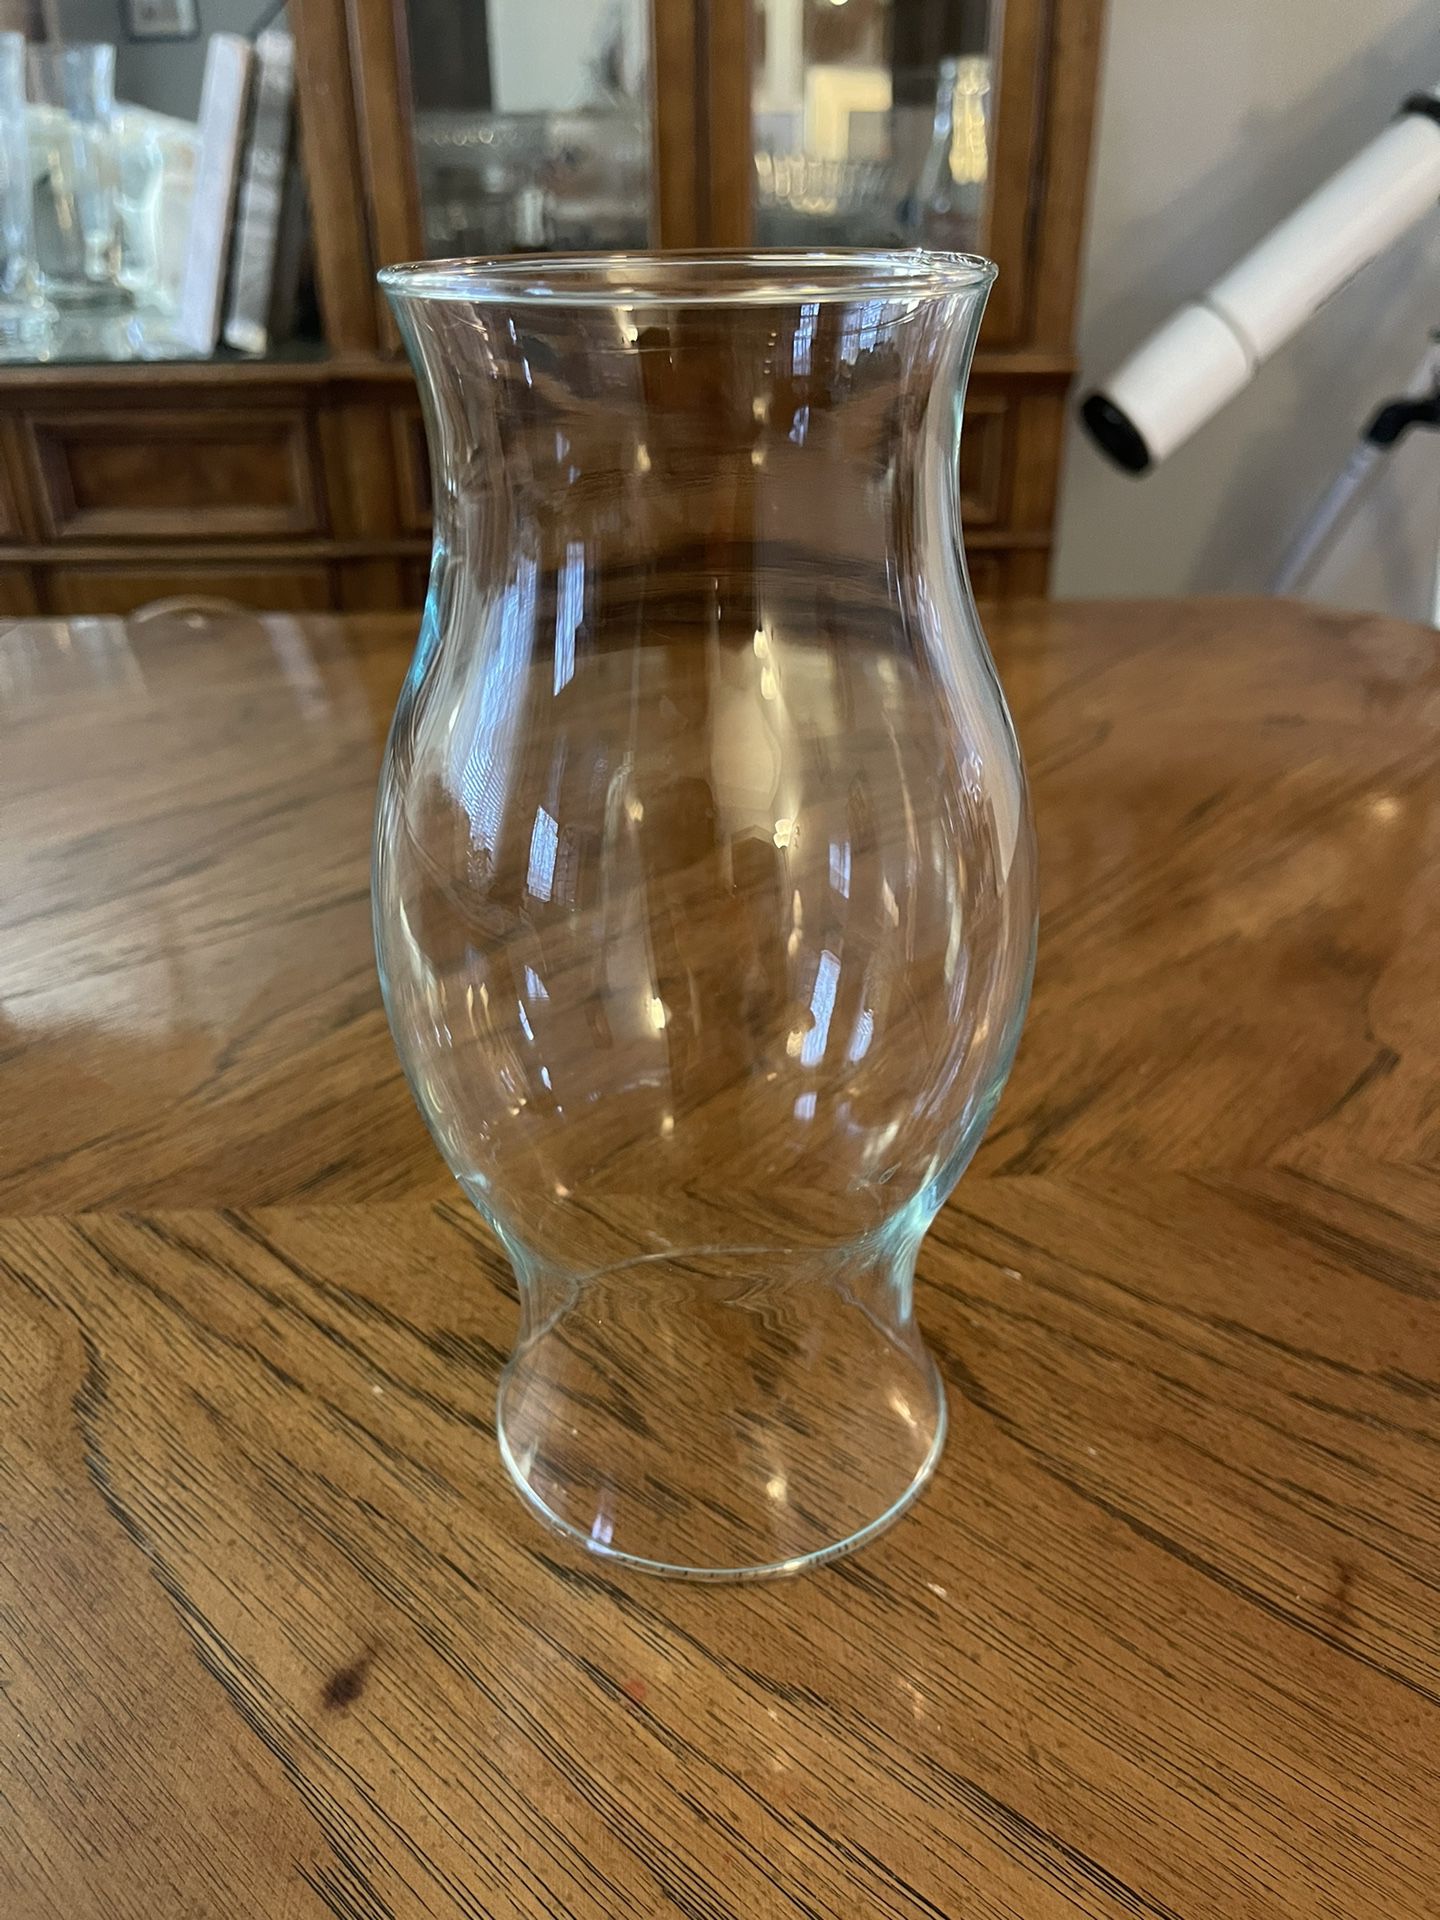 Partylite Glass Hurricane Lamp Replacement Shade